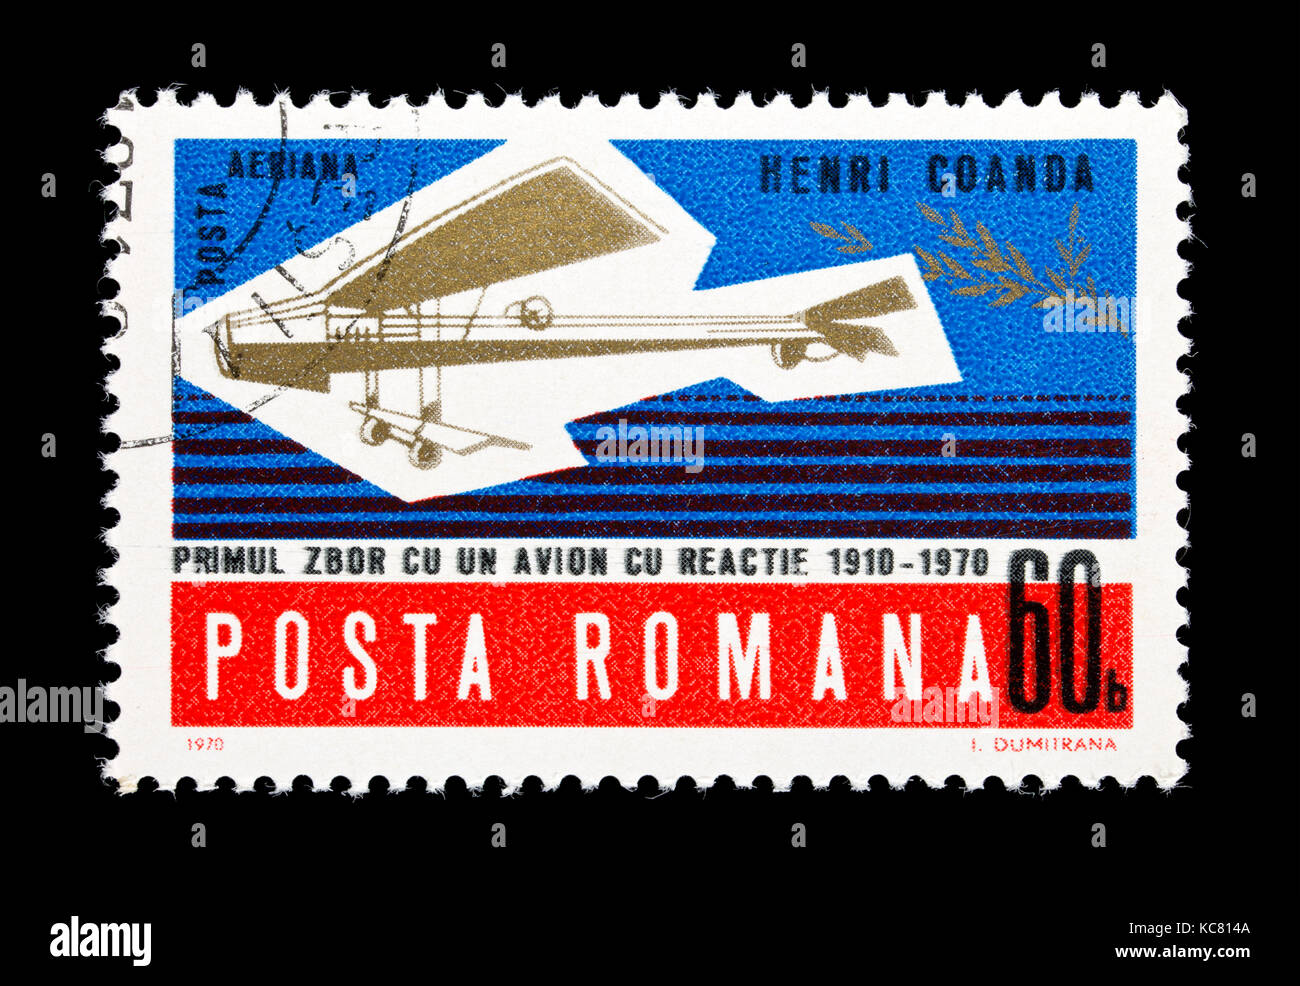 Postage stamp from Romania depicting Henri Coanda's model plane, 60th anniversary of his first flight. Stock Photo